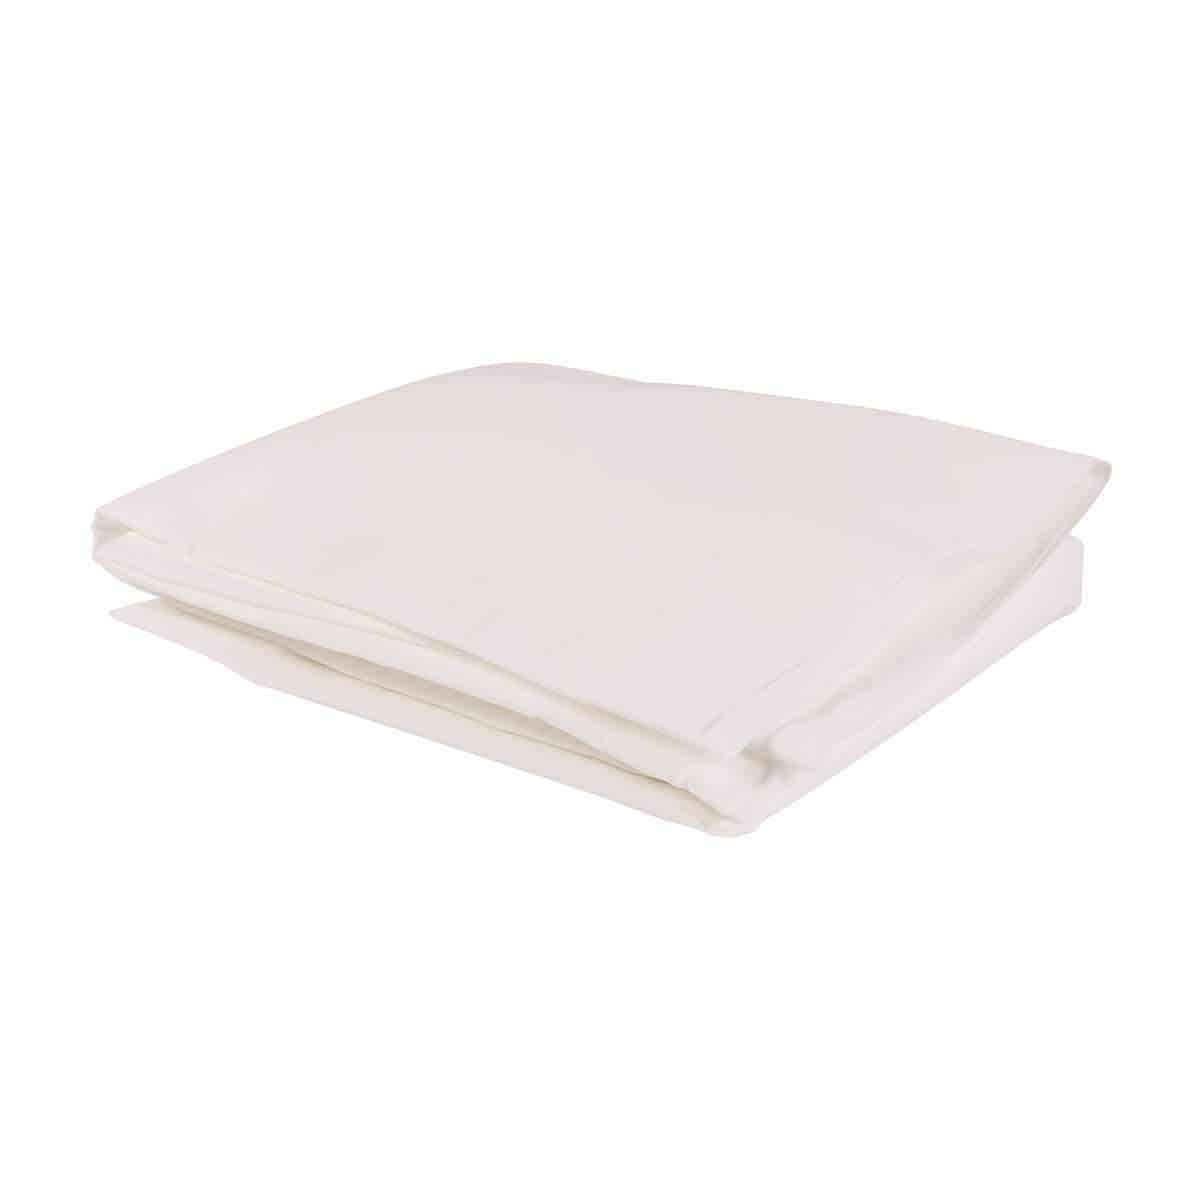 DMI Hospital Bedding Fitted Sheets - 36 Inch X 84 Inch X 6 Inch ...